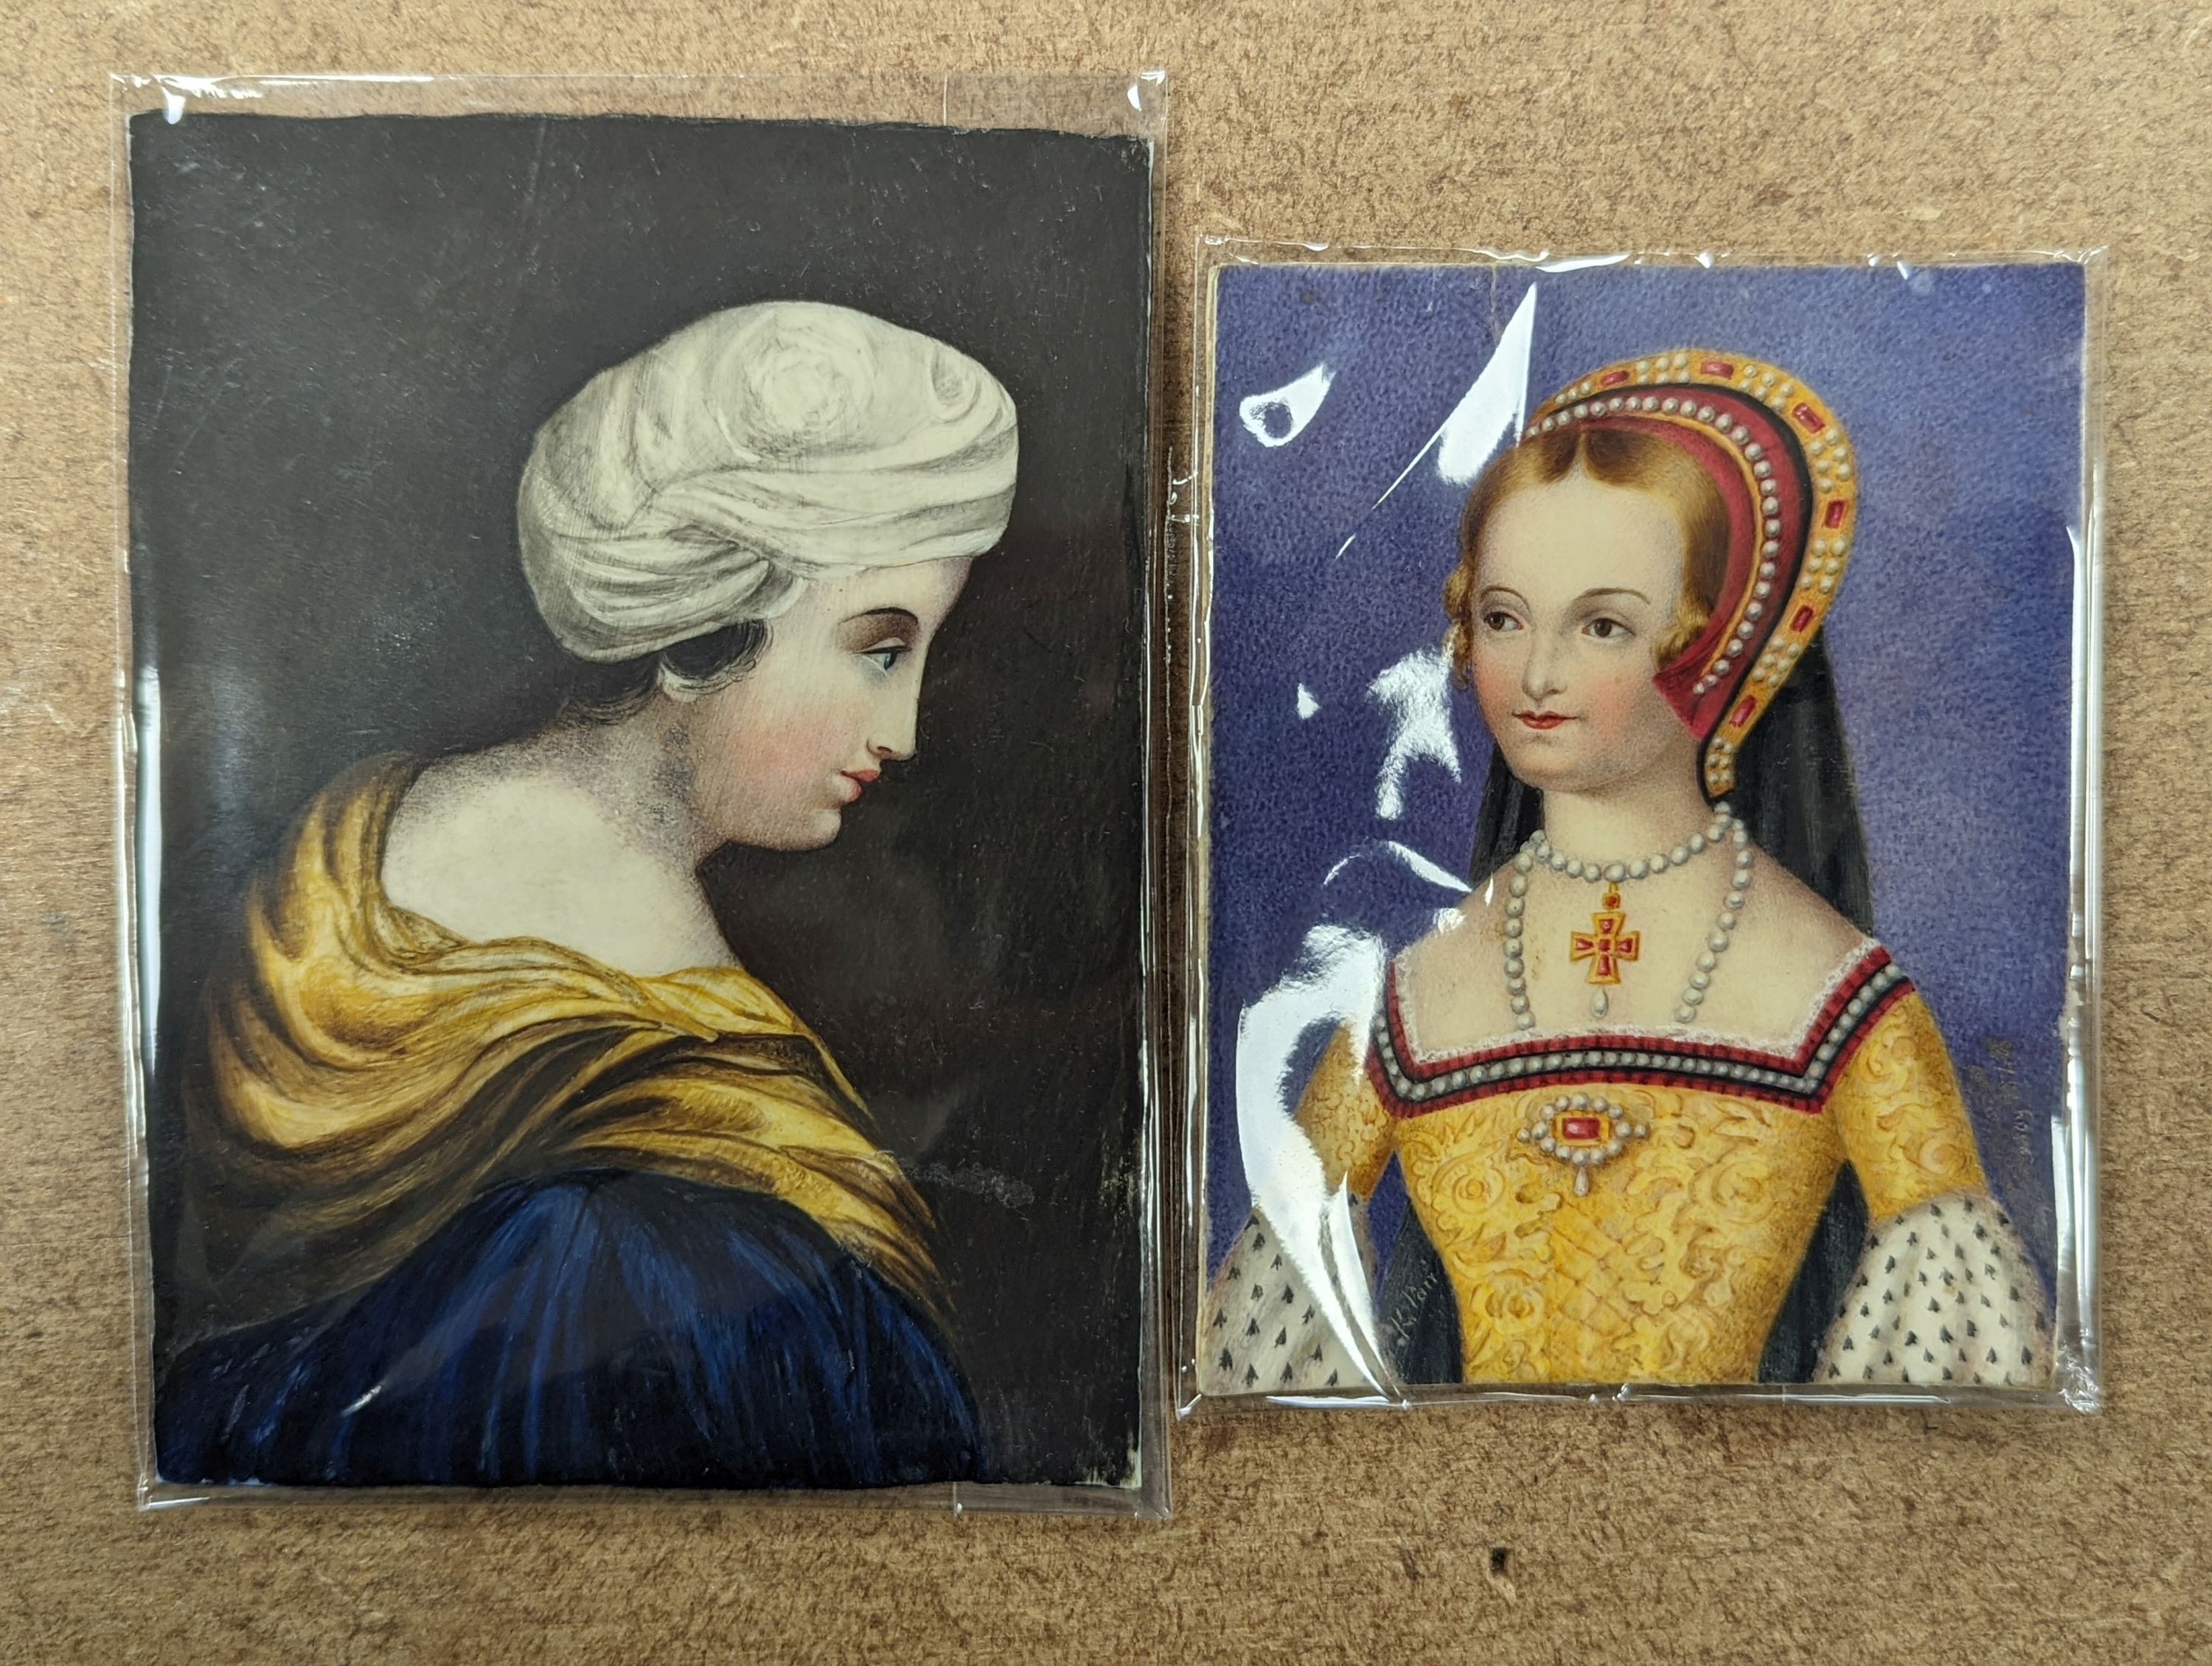 19th century English School, two watercolour on ivory miniatures, Portrait of Catherine Parr c.1853, 10 x 7.5cm and a portrait of a lady wearing a turban, 11.5 x 8.5cm, both unframed